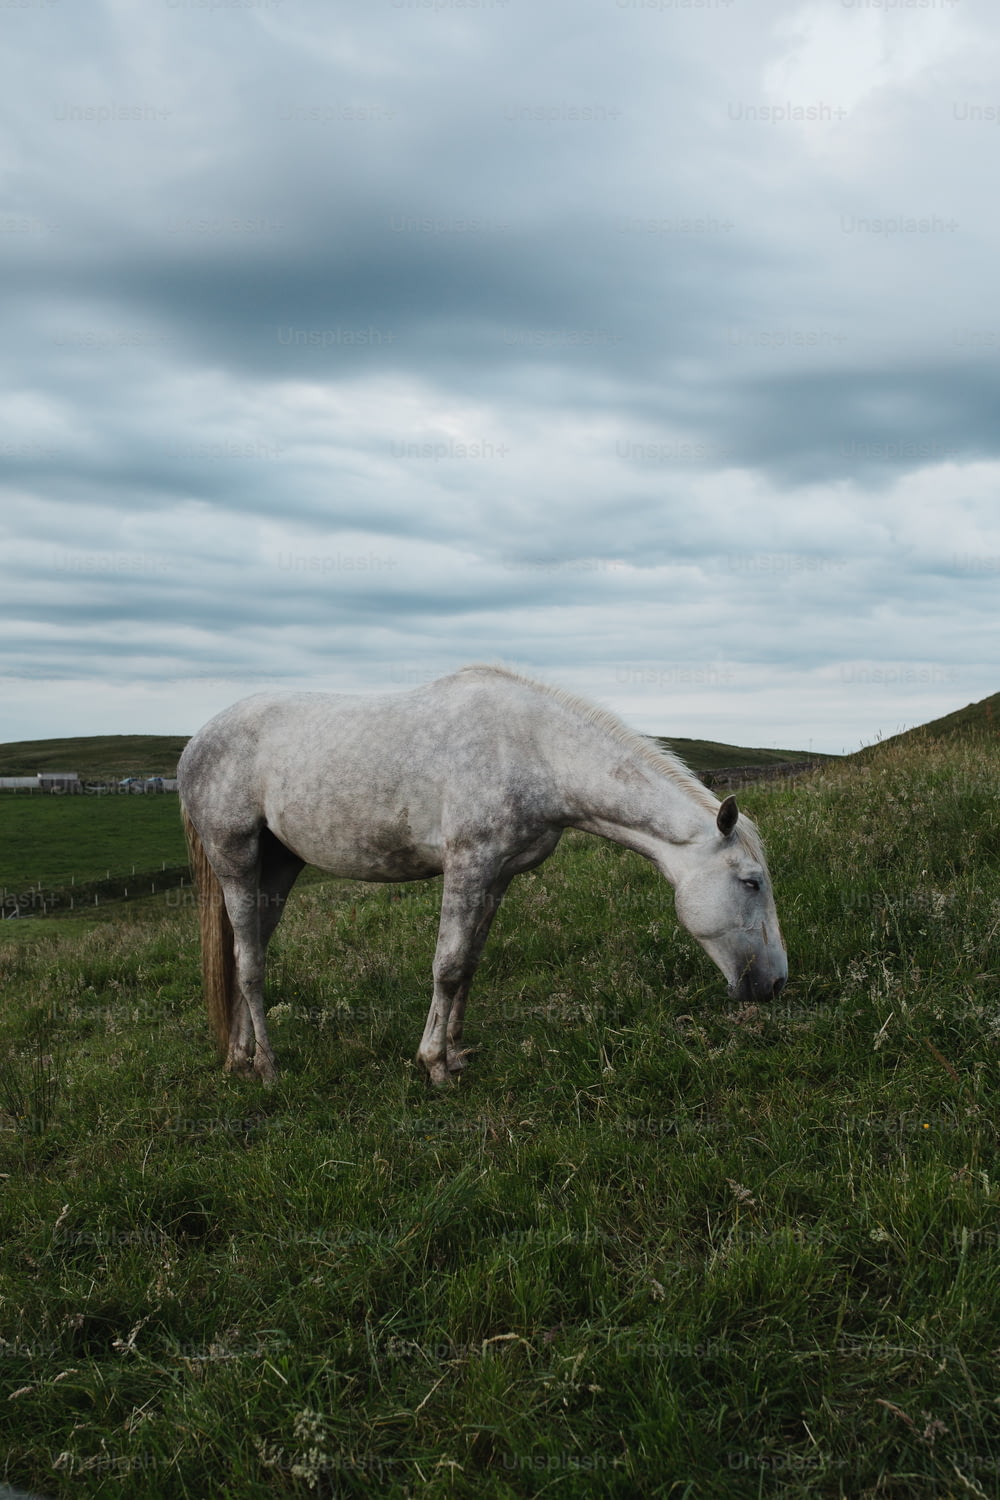 a white horse eating grass in a field